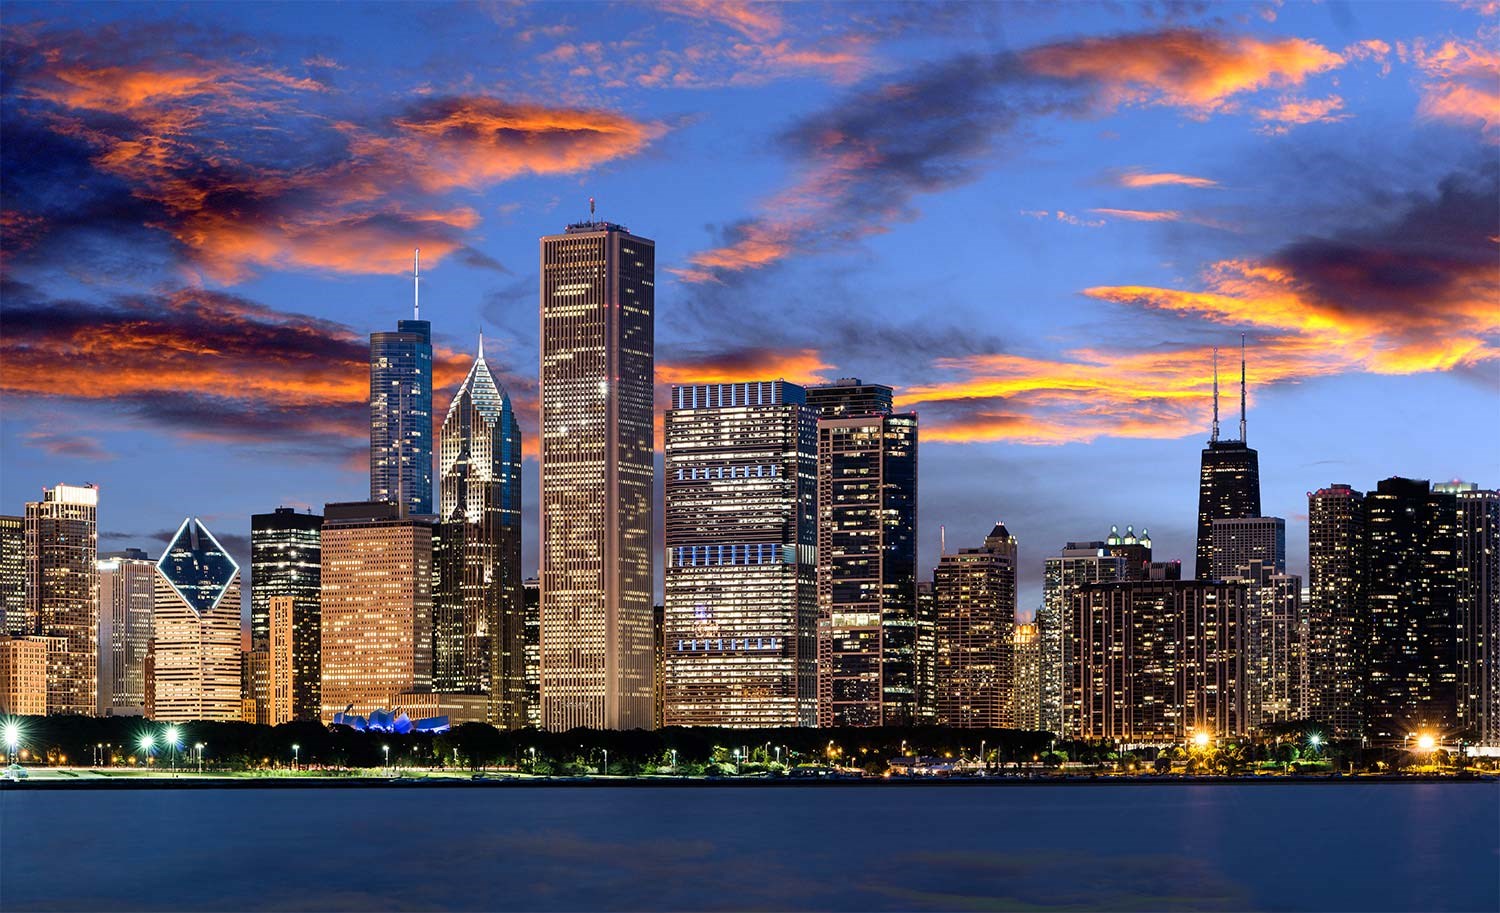 Image of Chicago skyline at night. Error Page